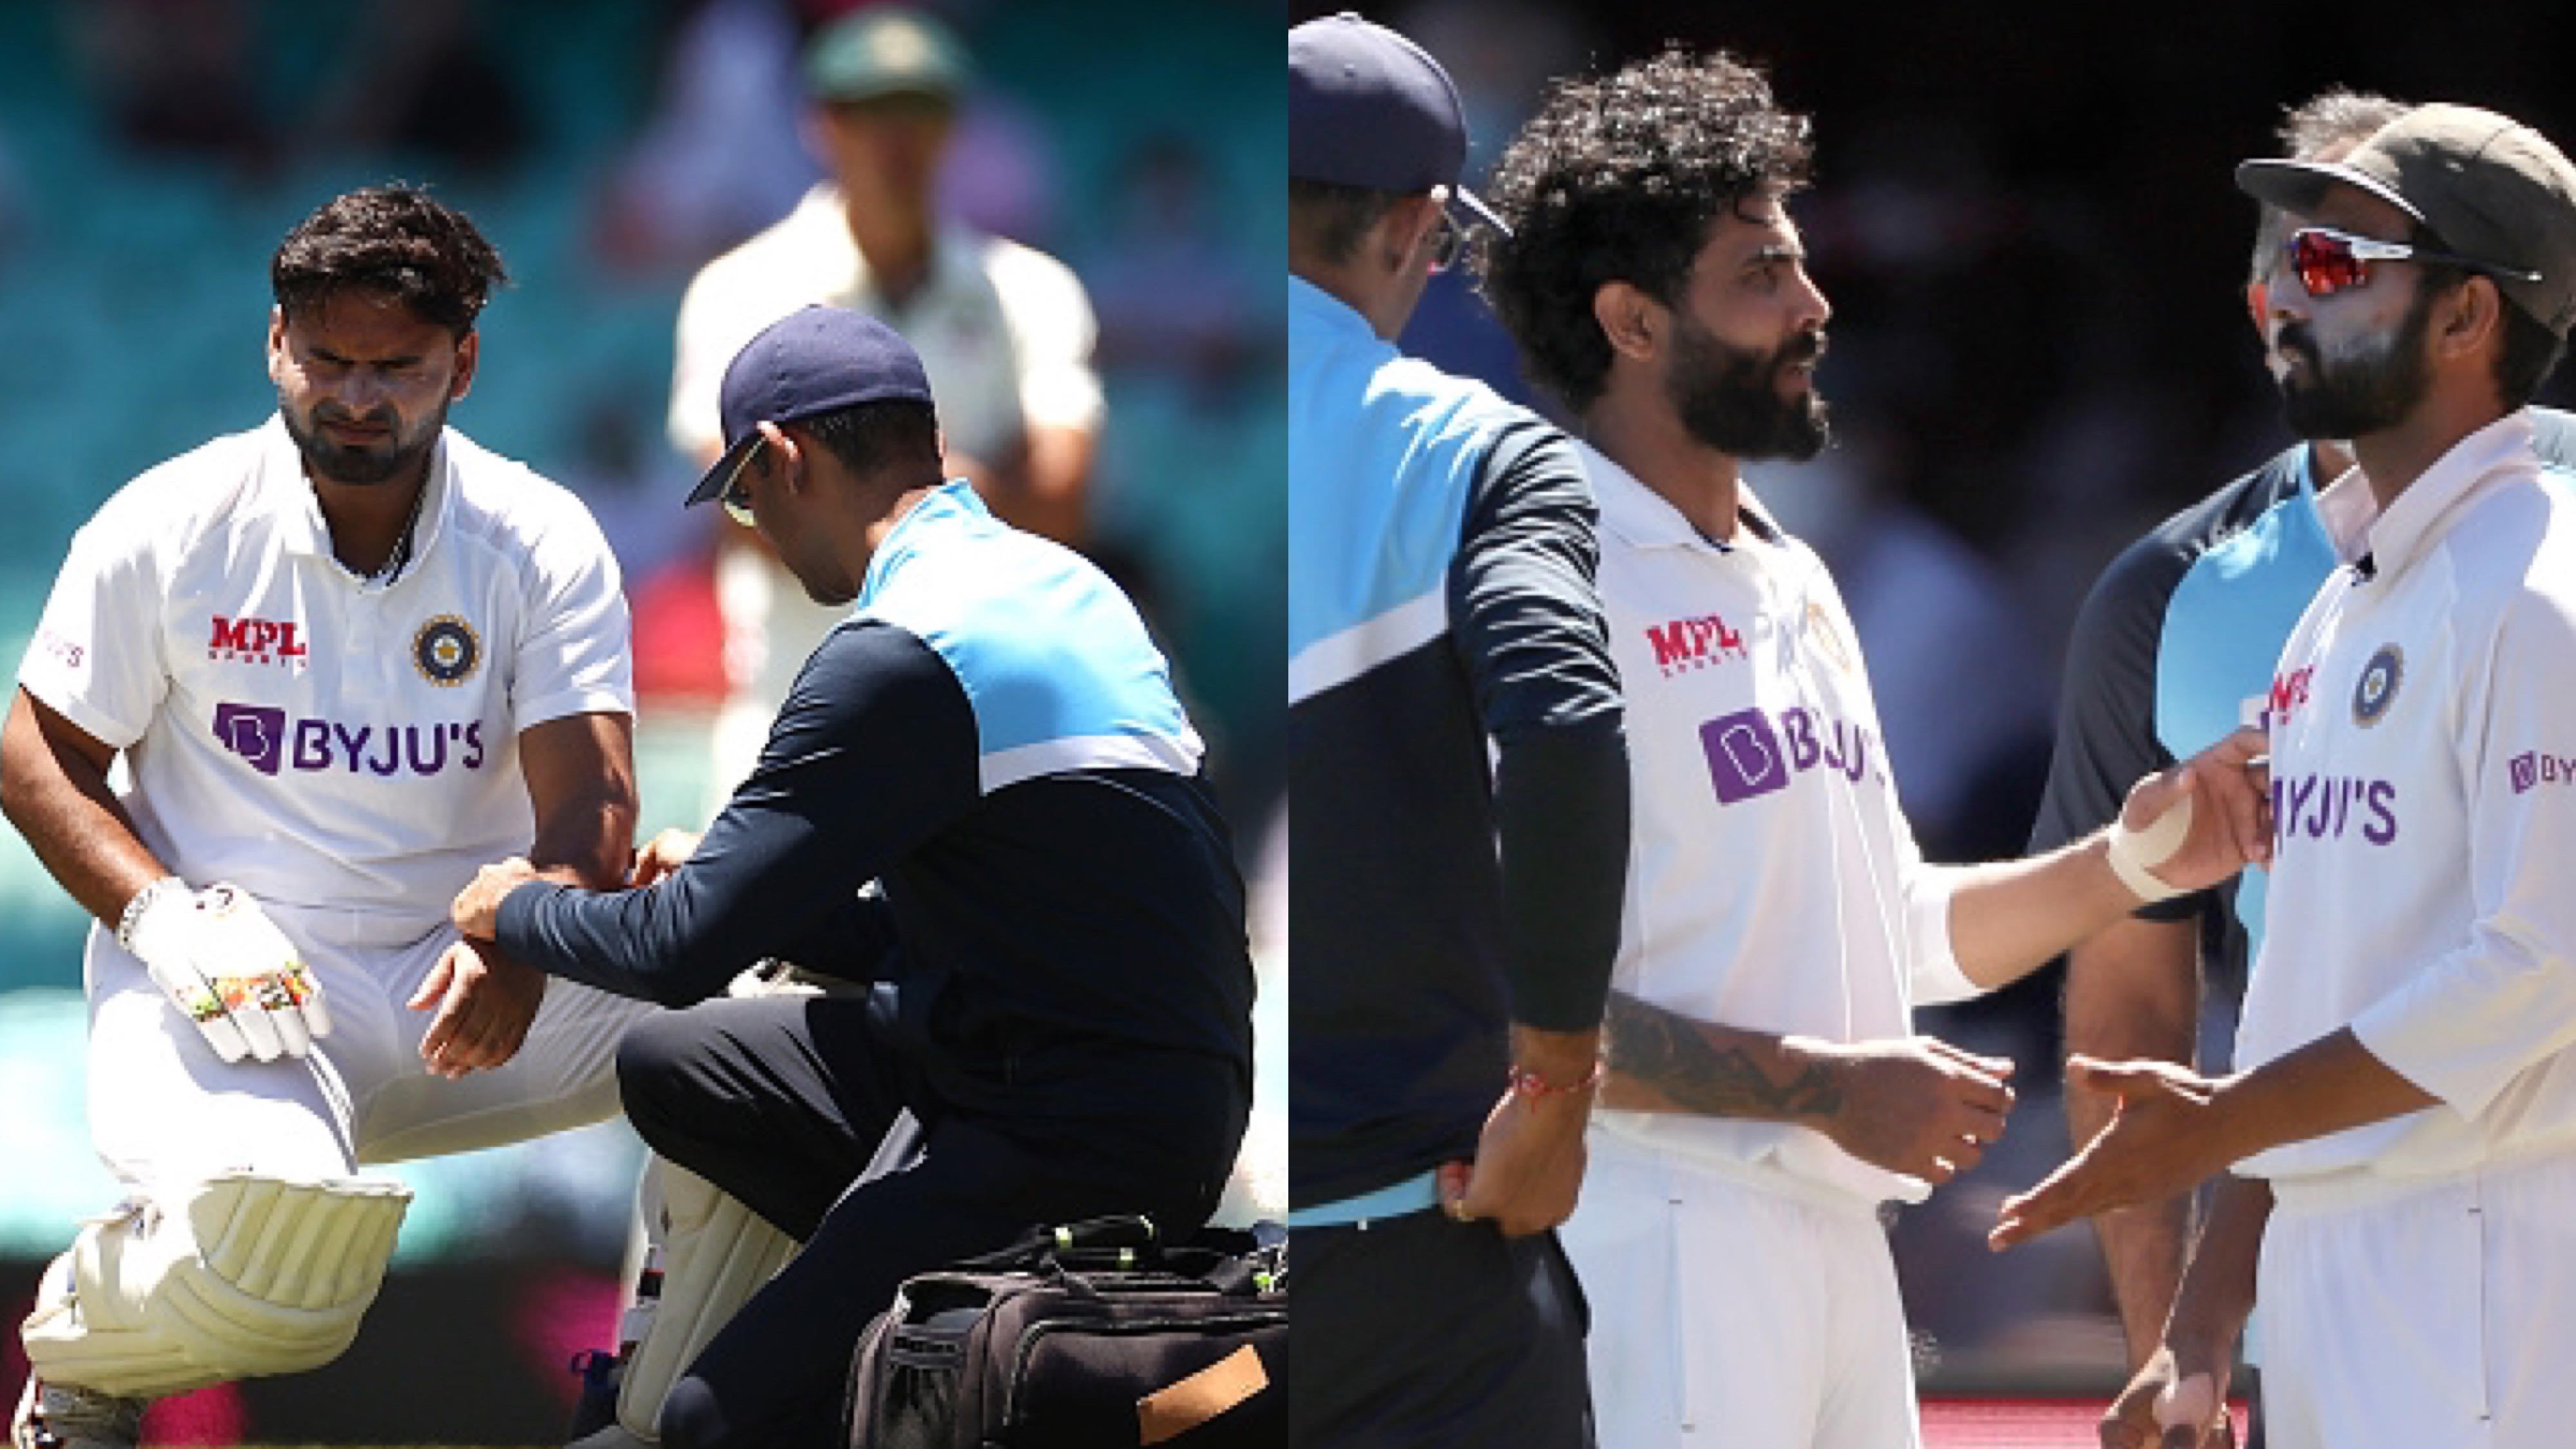 AUS v IND 2020-21: Pant set to bat in second innings; Jadeja likely to be ruled out - Report